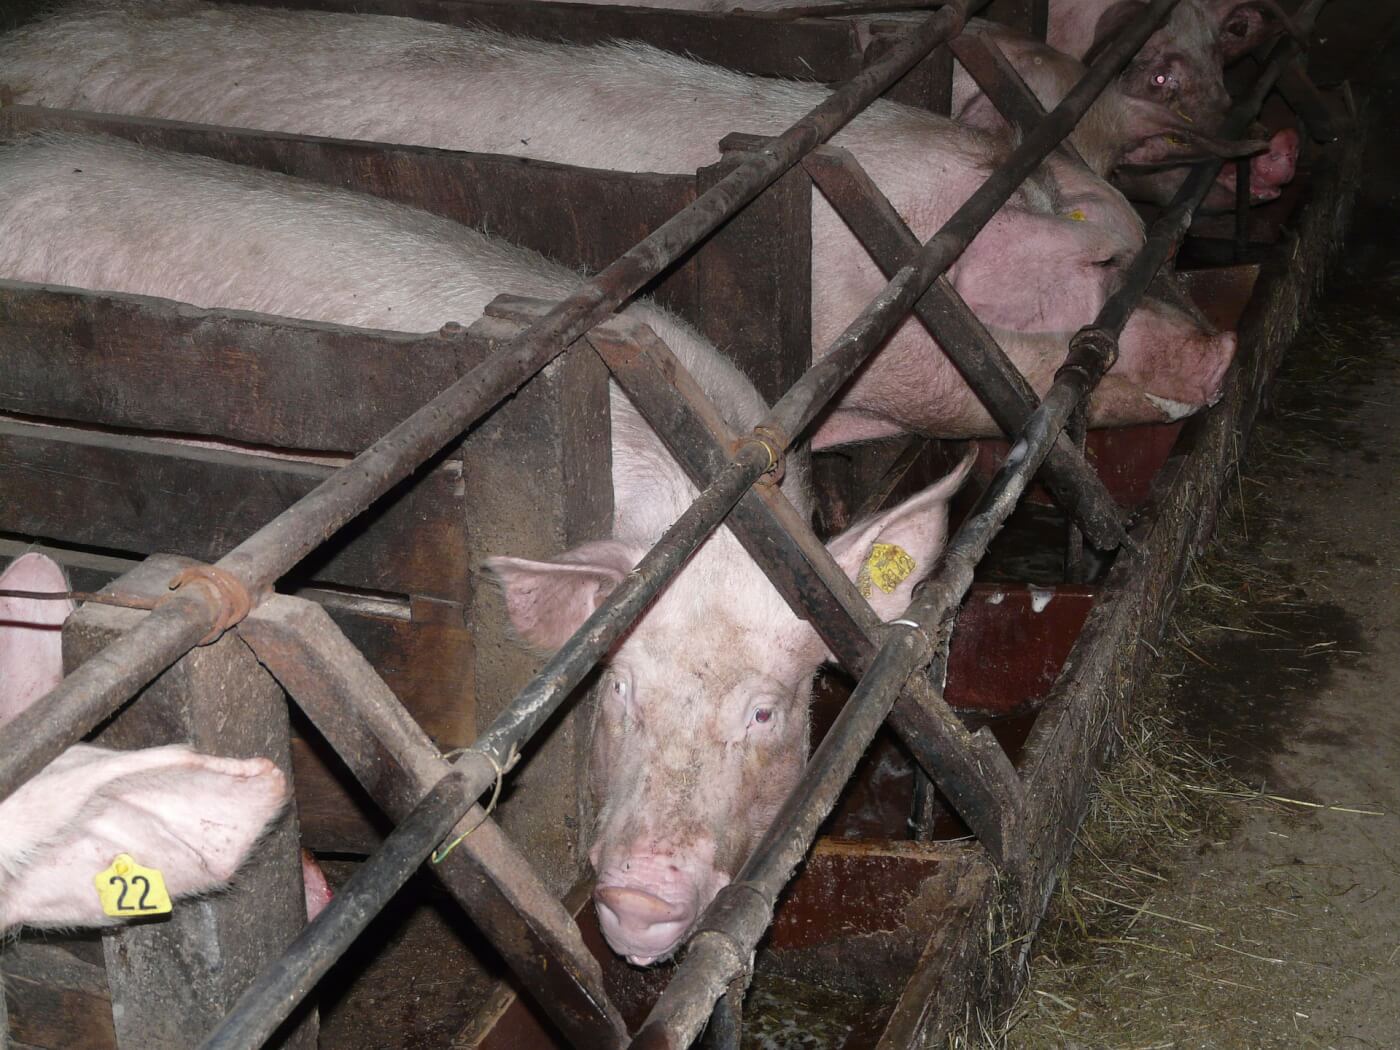 Animal Welfare Board Urges Ministry to Act on Cruel Crates Used to Confine  Mother Pigs, Following PETA India Appeal - Blog - PETA India